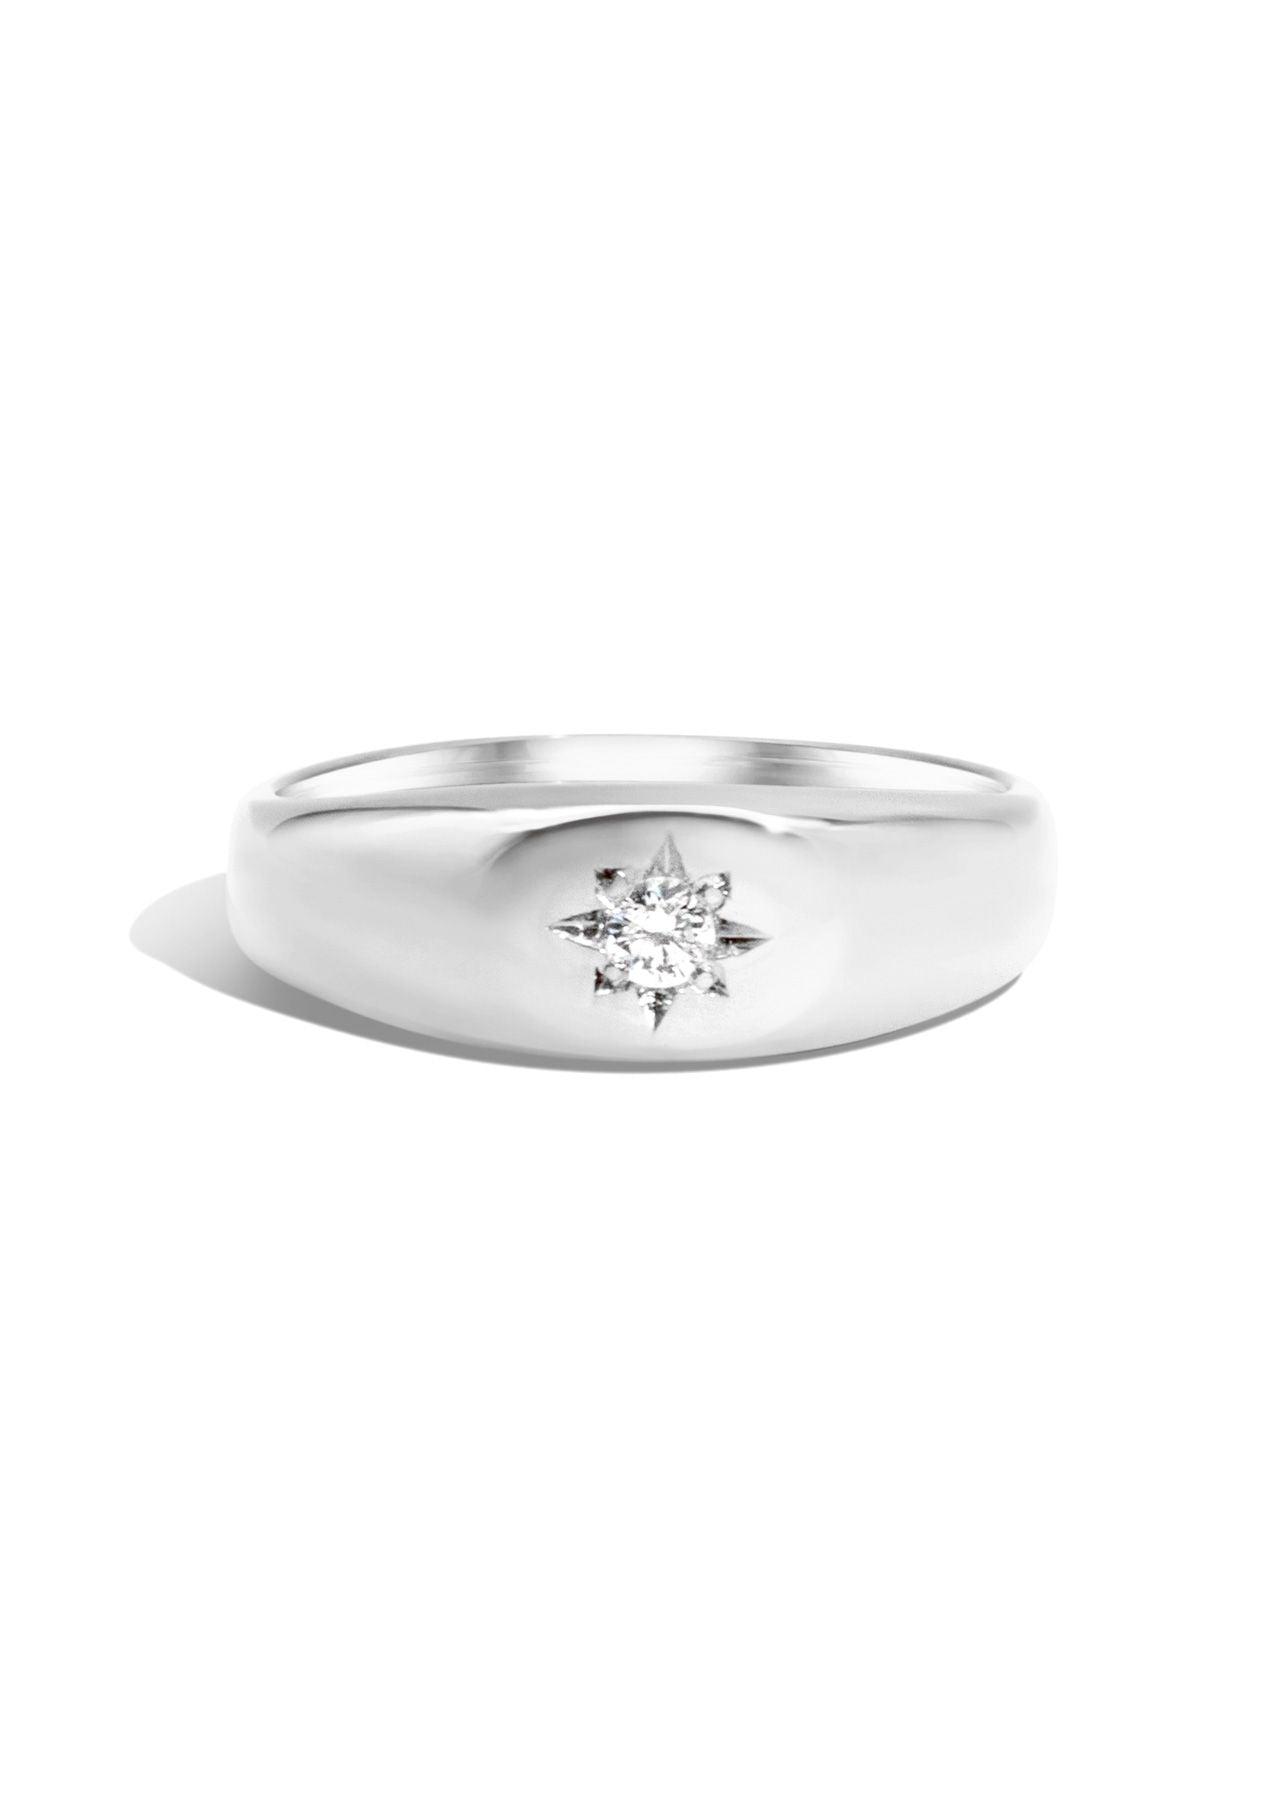 The Astra White Gold Signet Ring